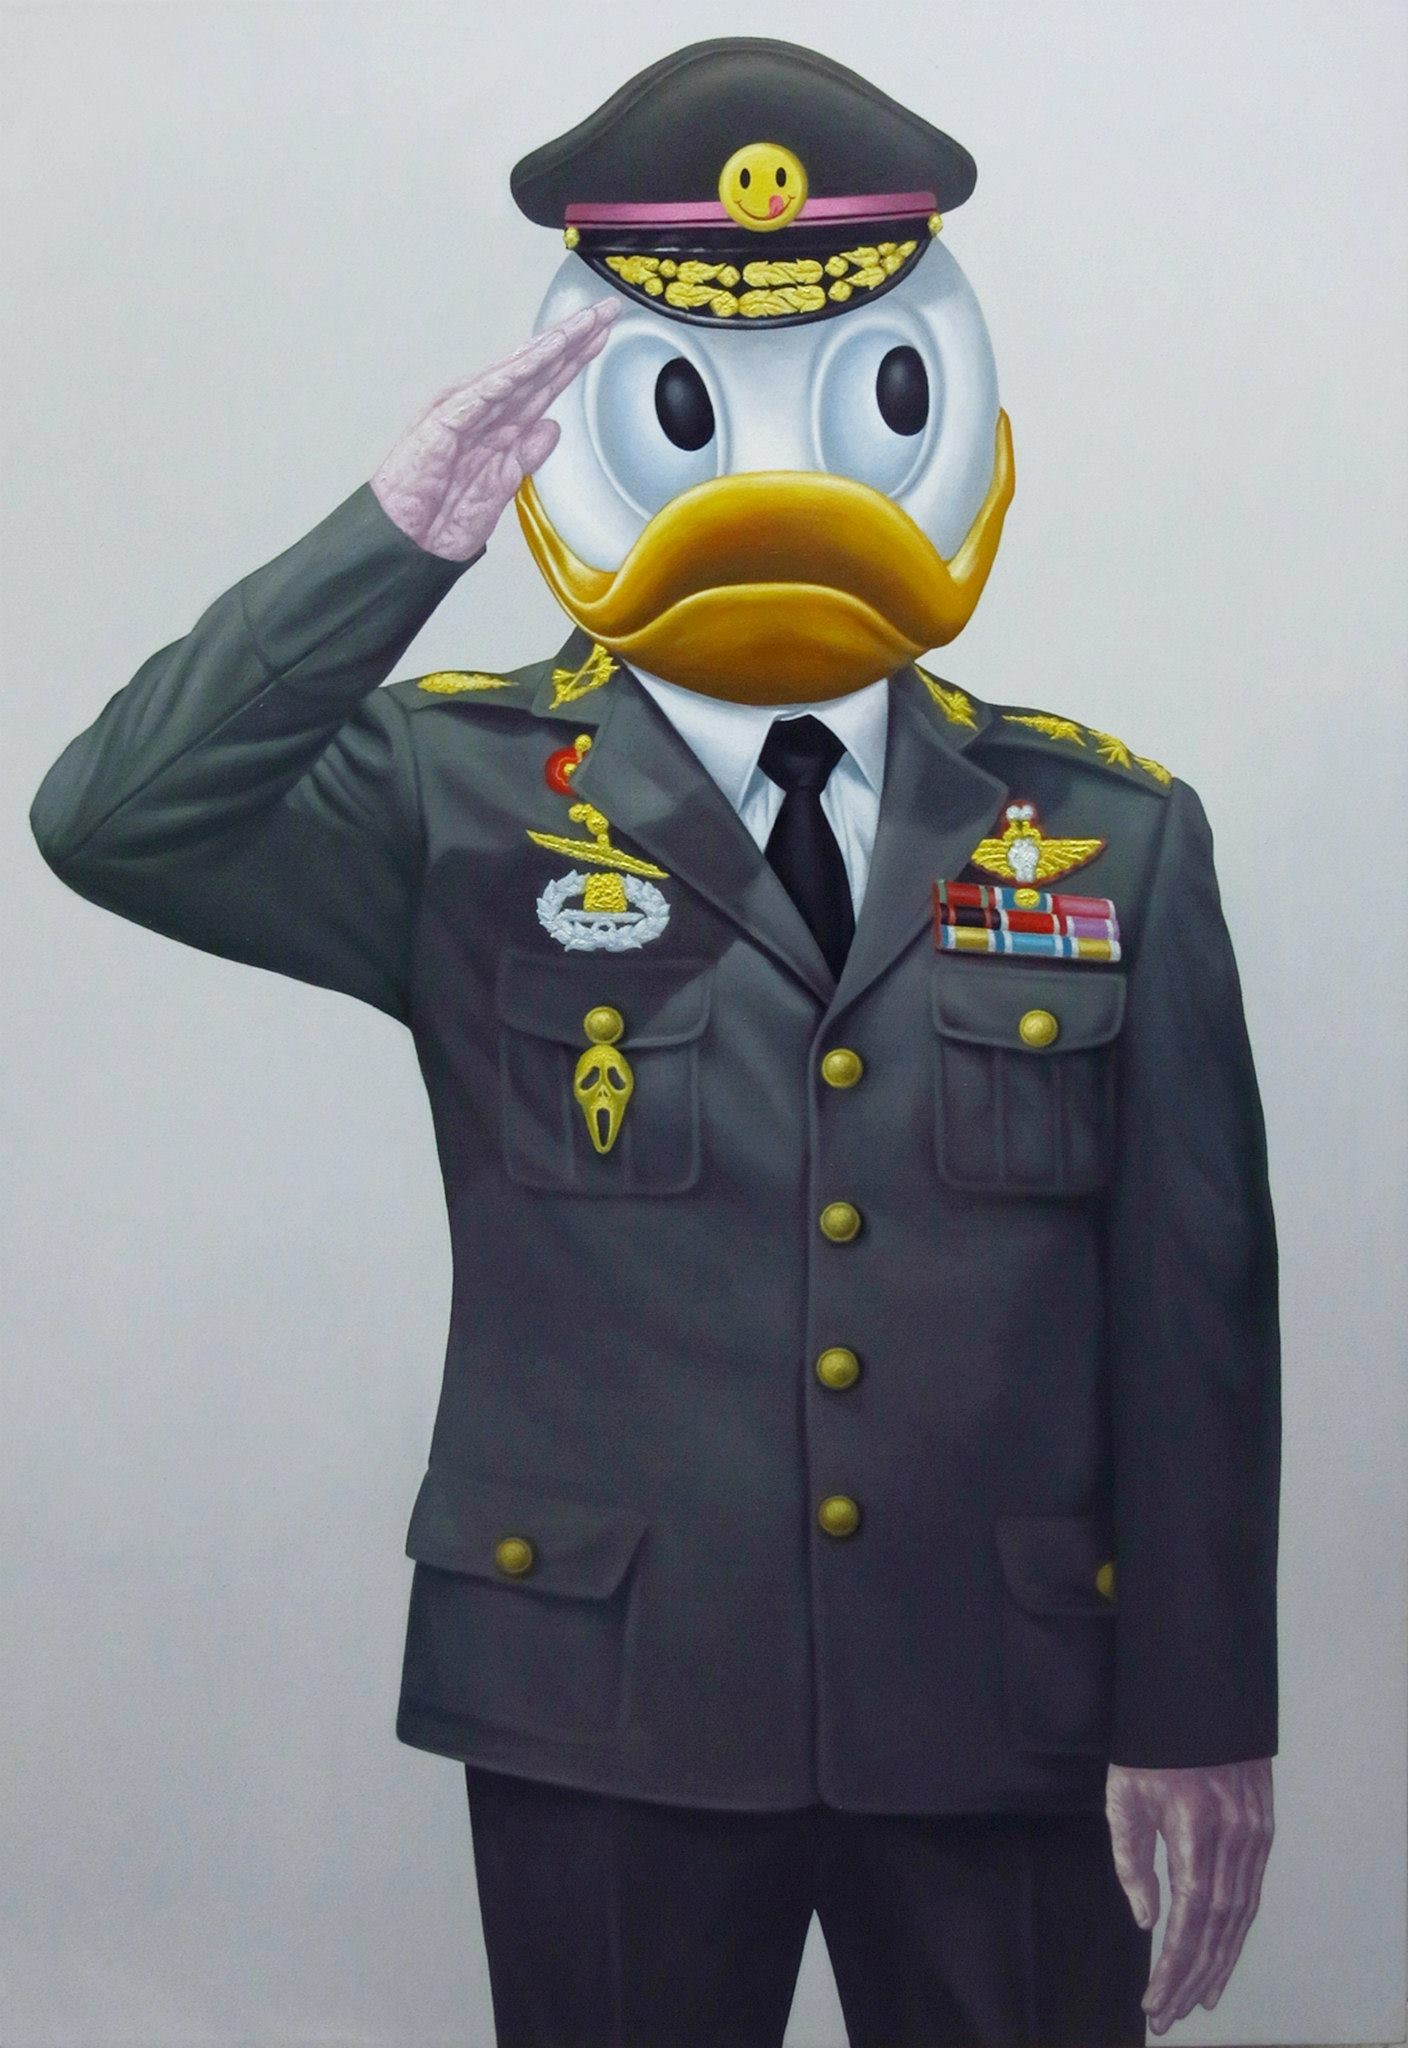 General Duck! (2013) Oil on canvas, 90x130 cm.